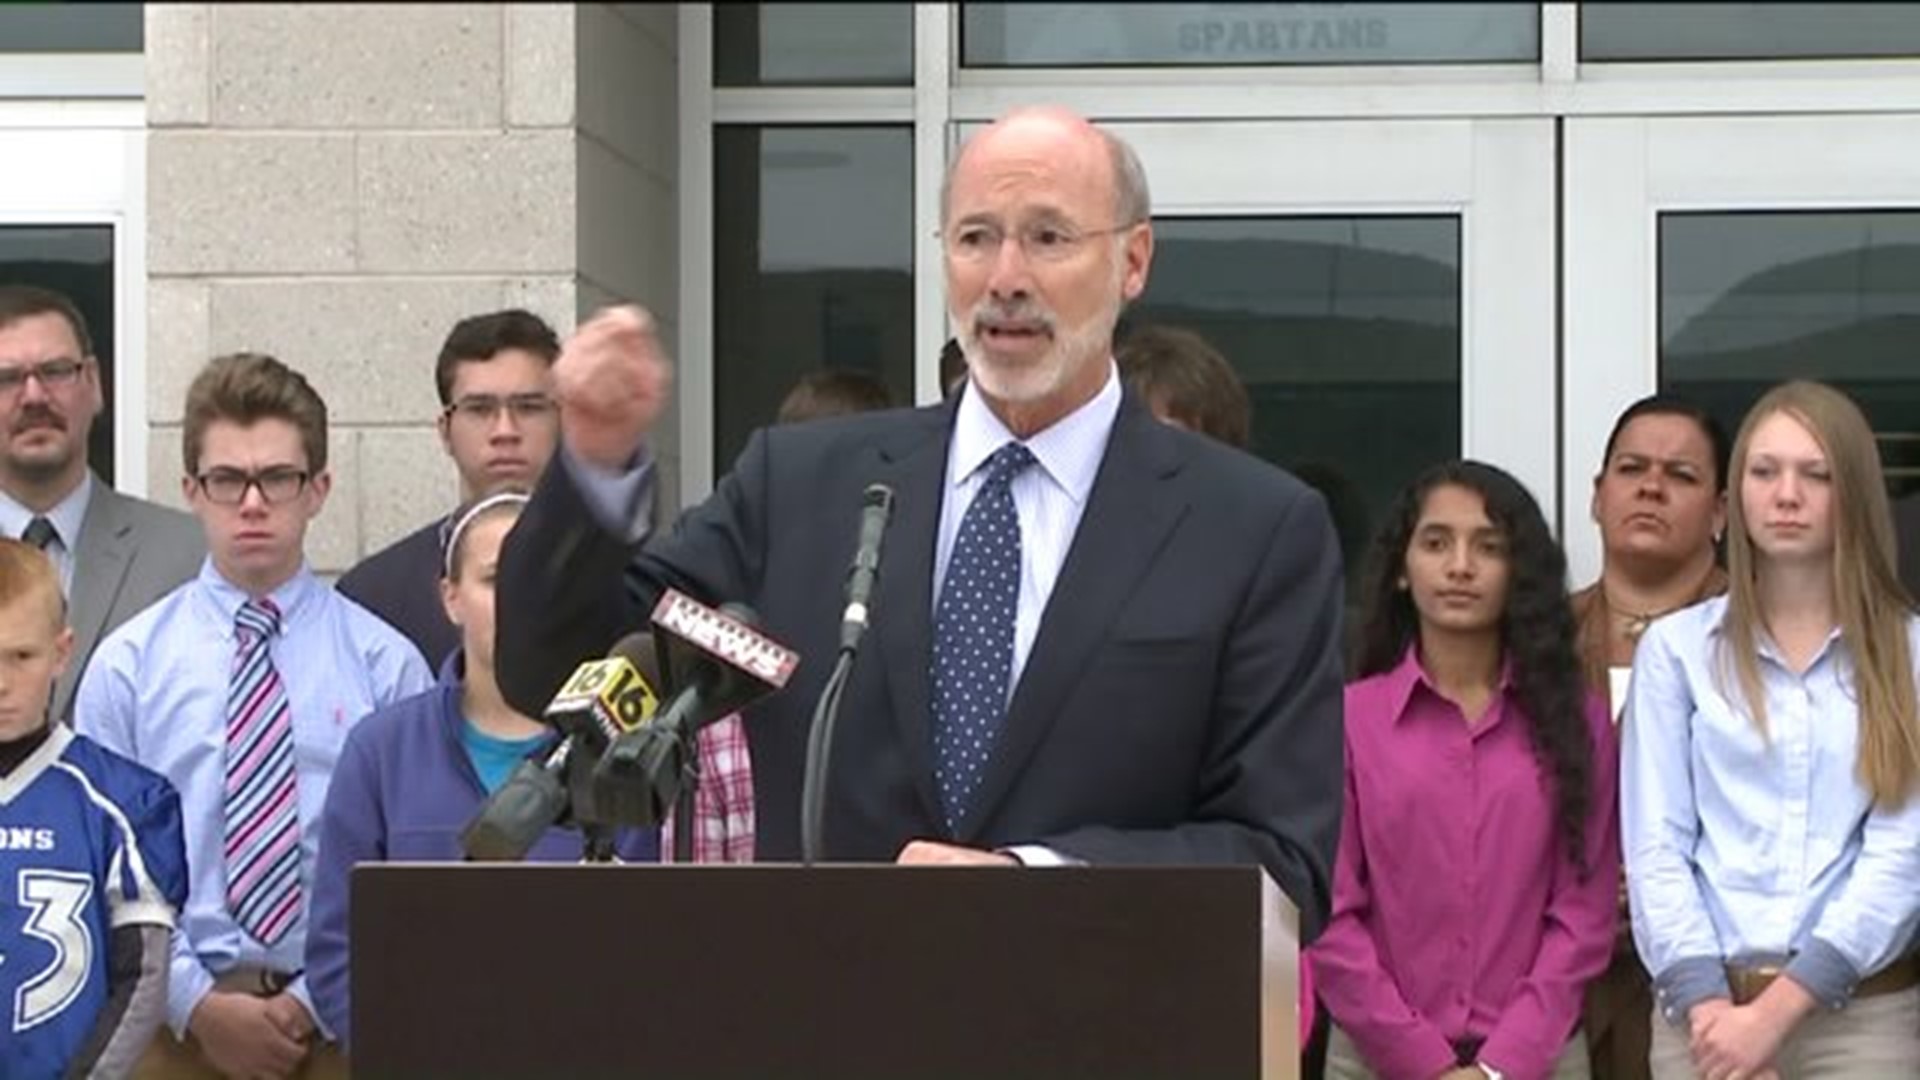 Governor Wolf Brings Budget Battle to Lackawanna County